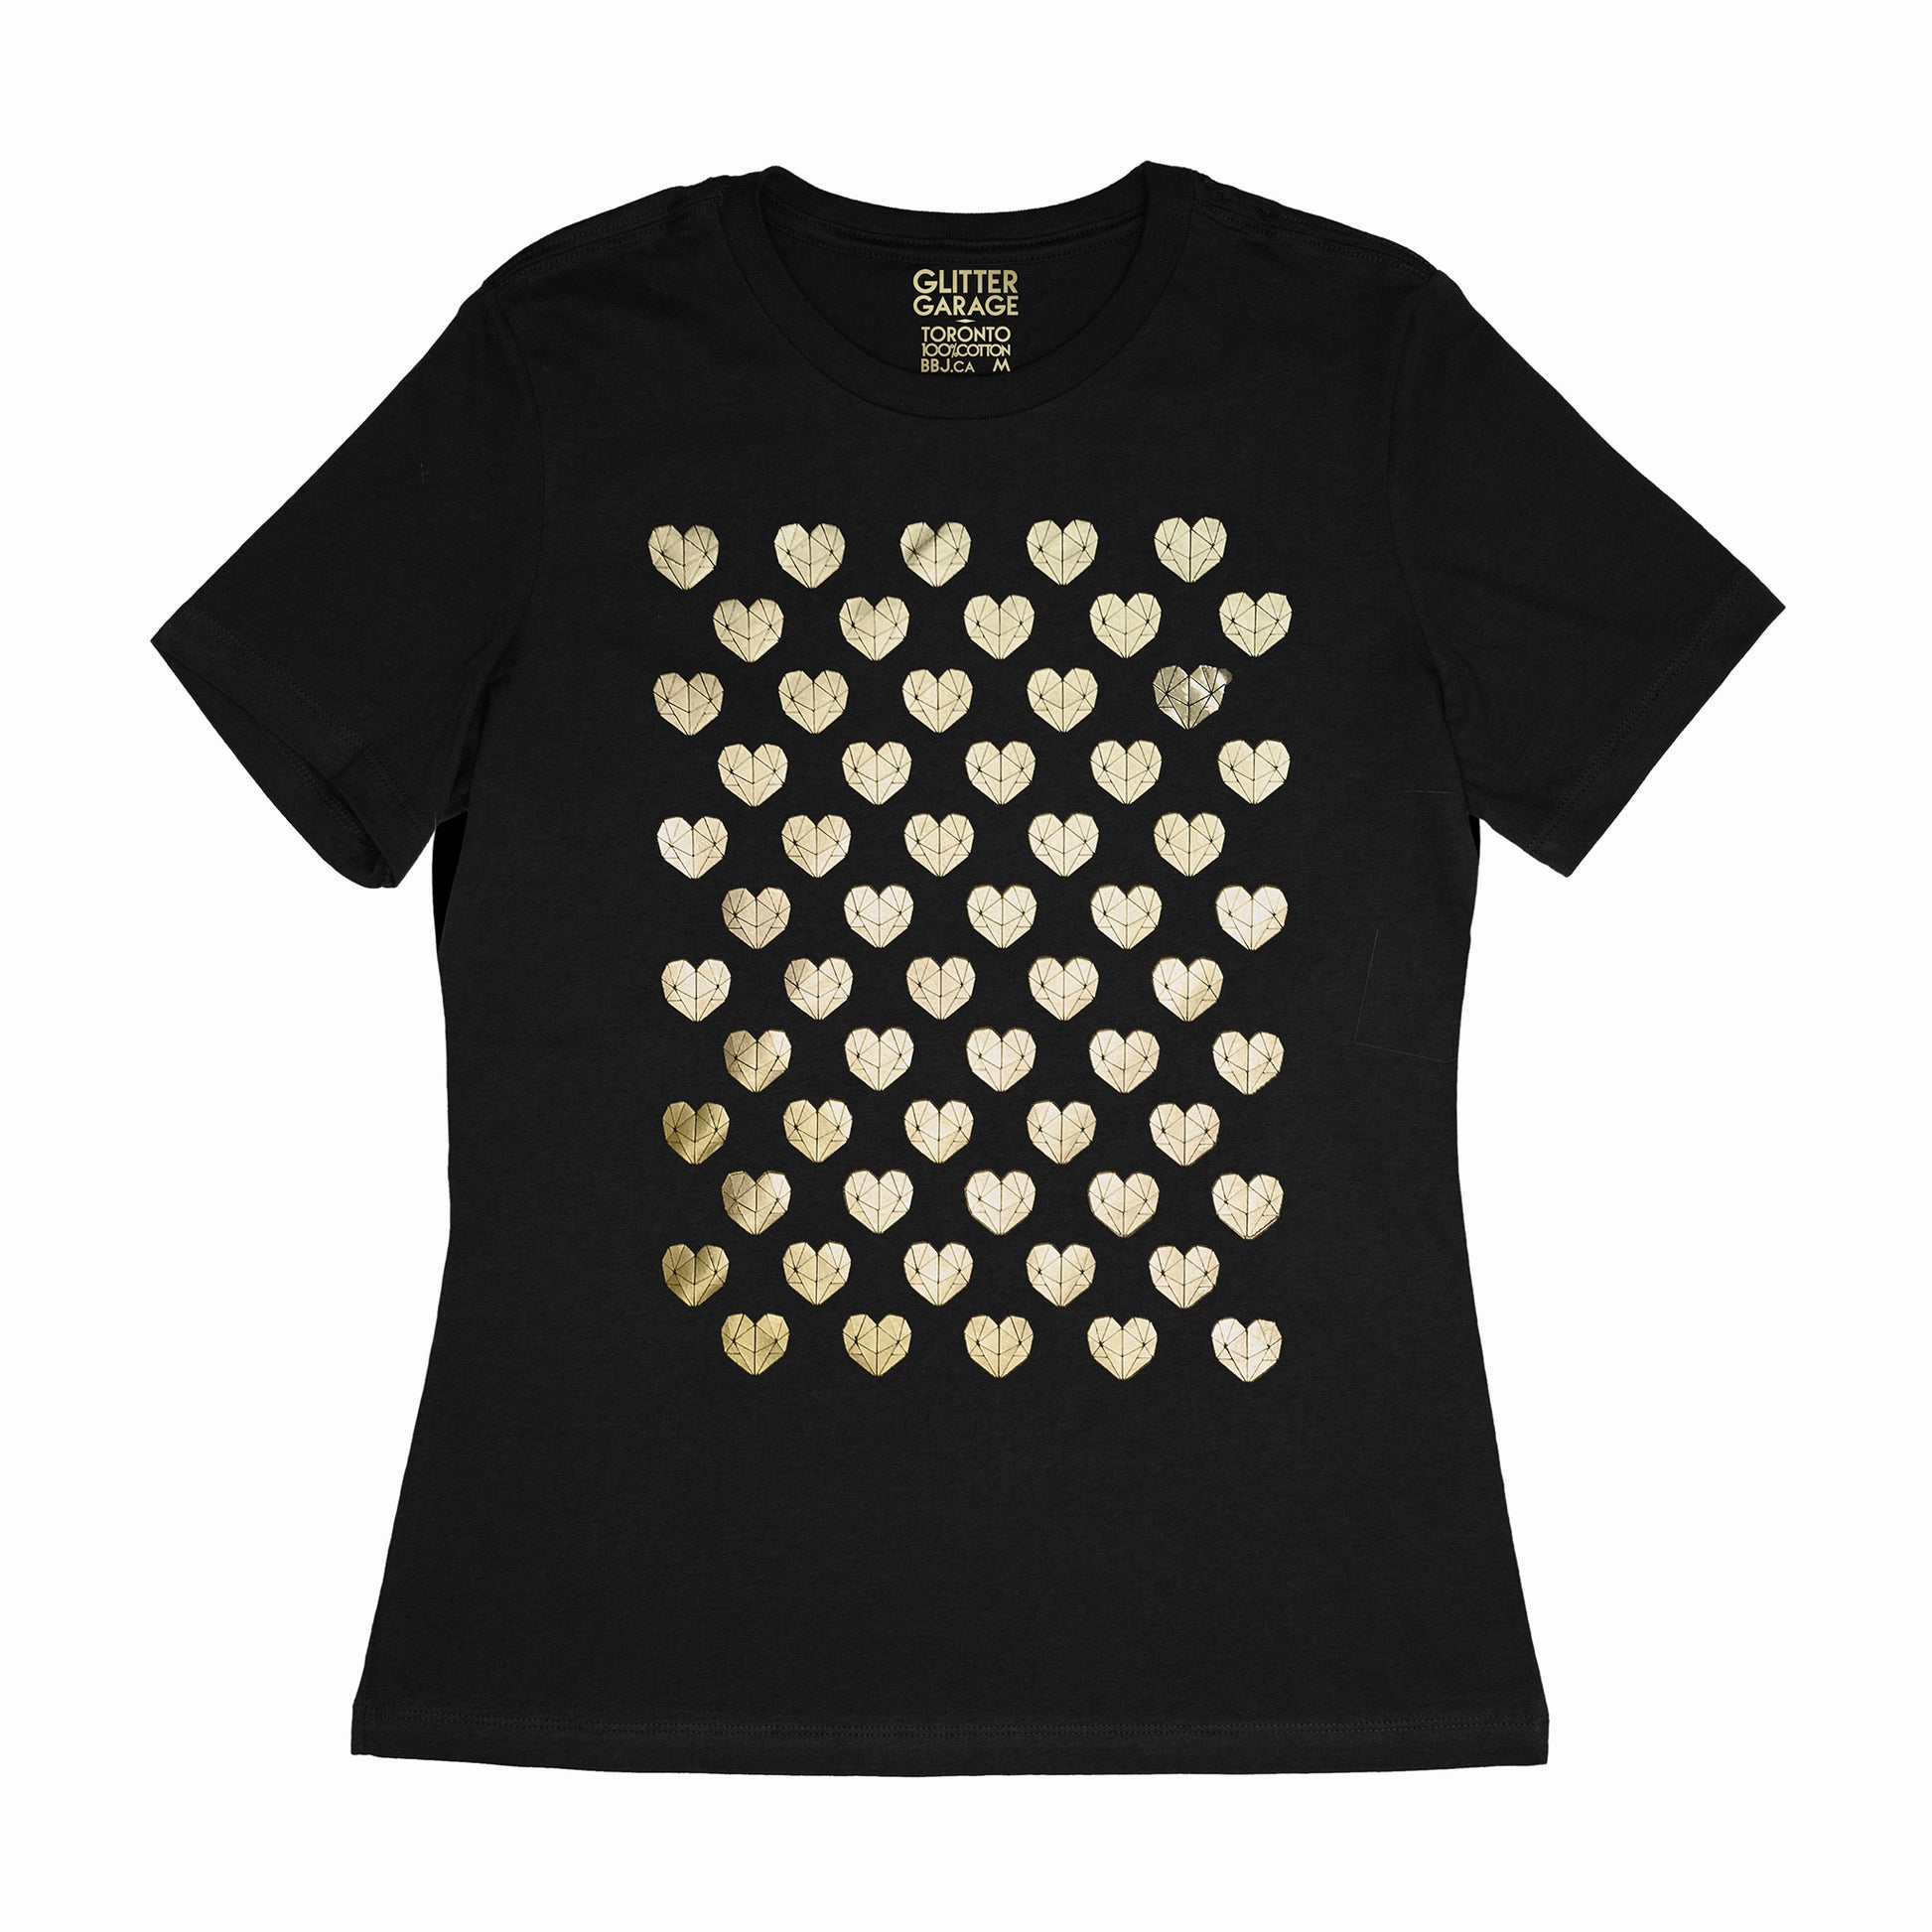 Many Hearts customizable tee - black women's relaxed fit tee with 60 hearts  - gold matte, metallic by BBJ / Glitter Garage